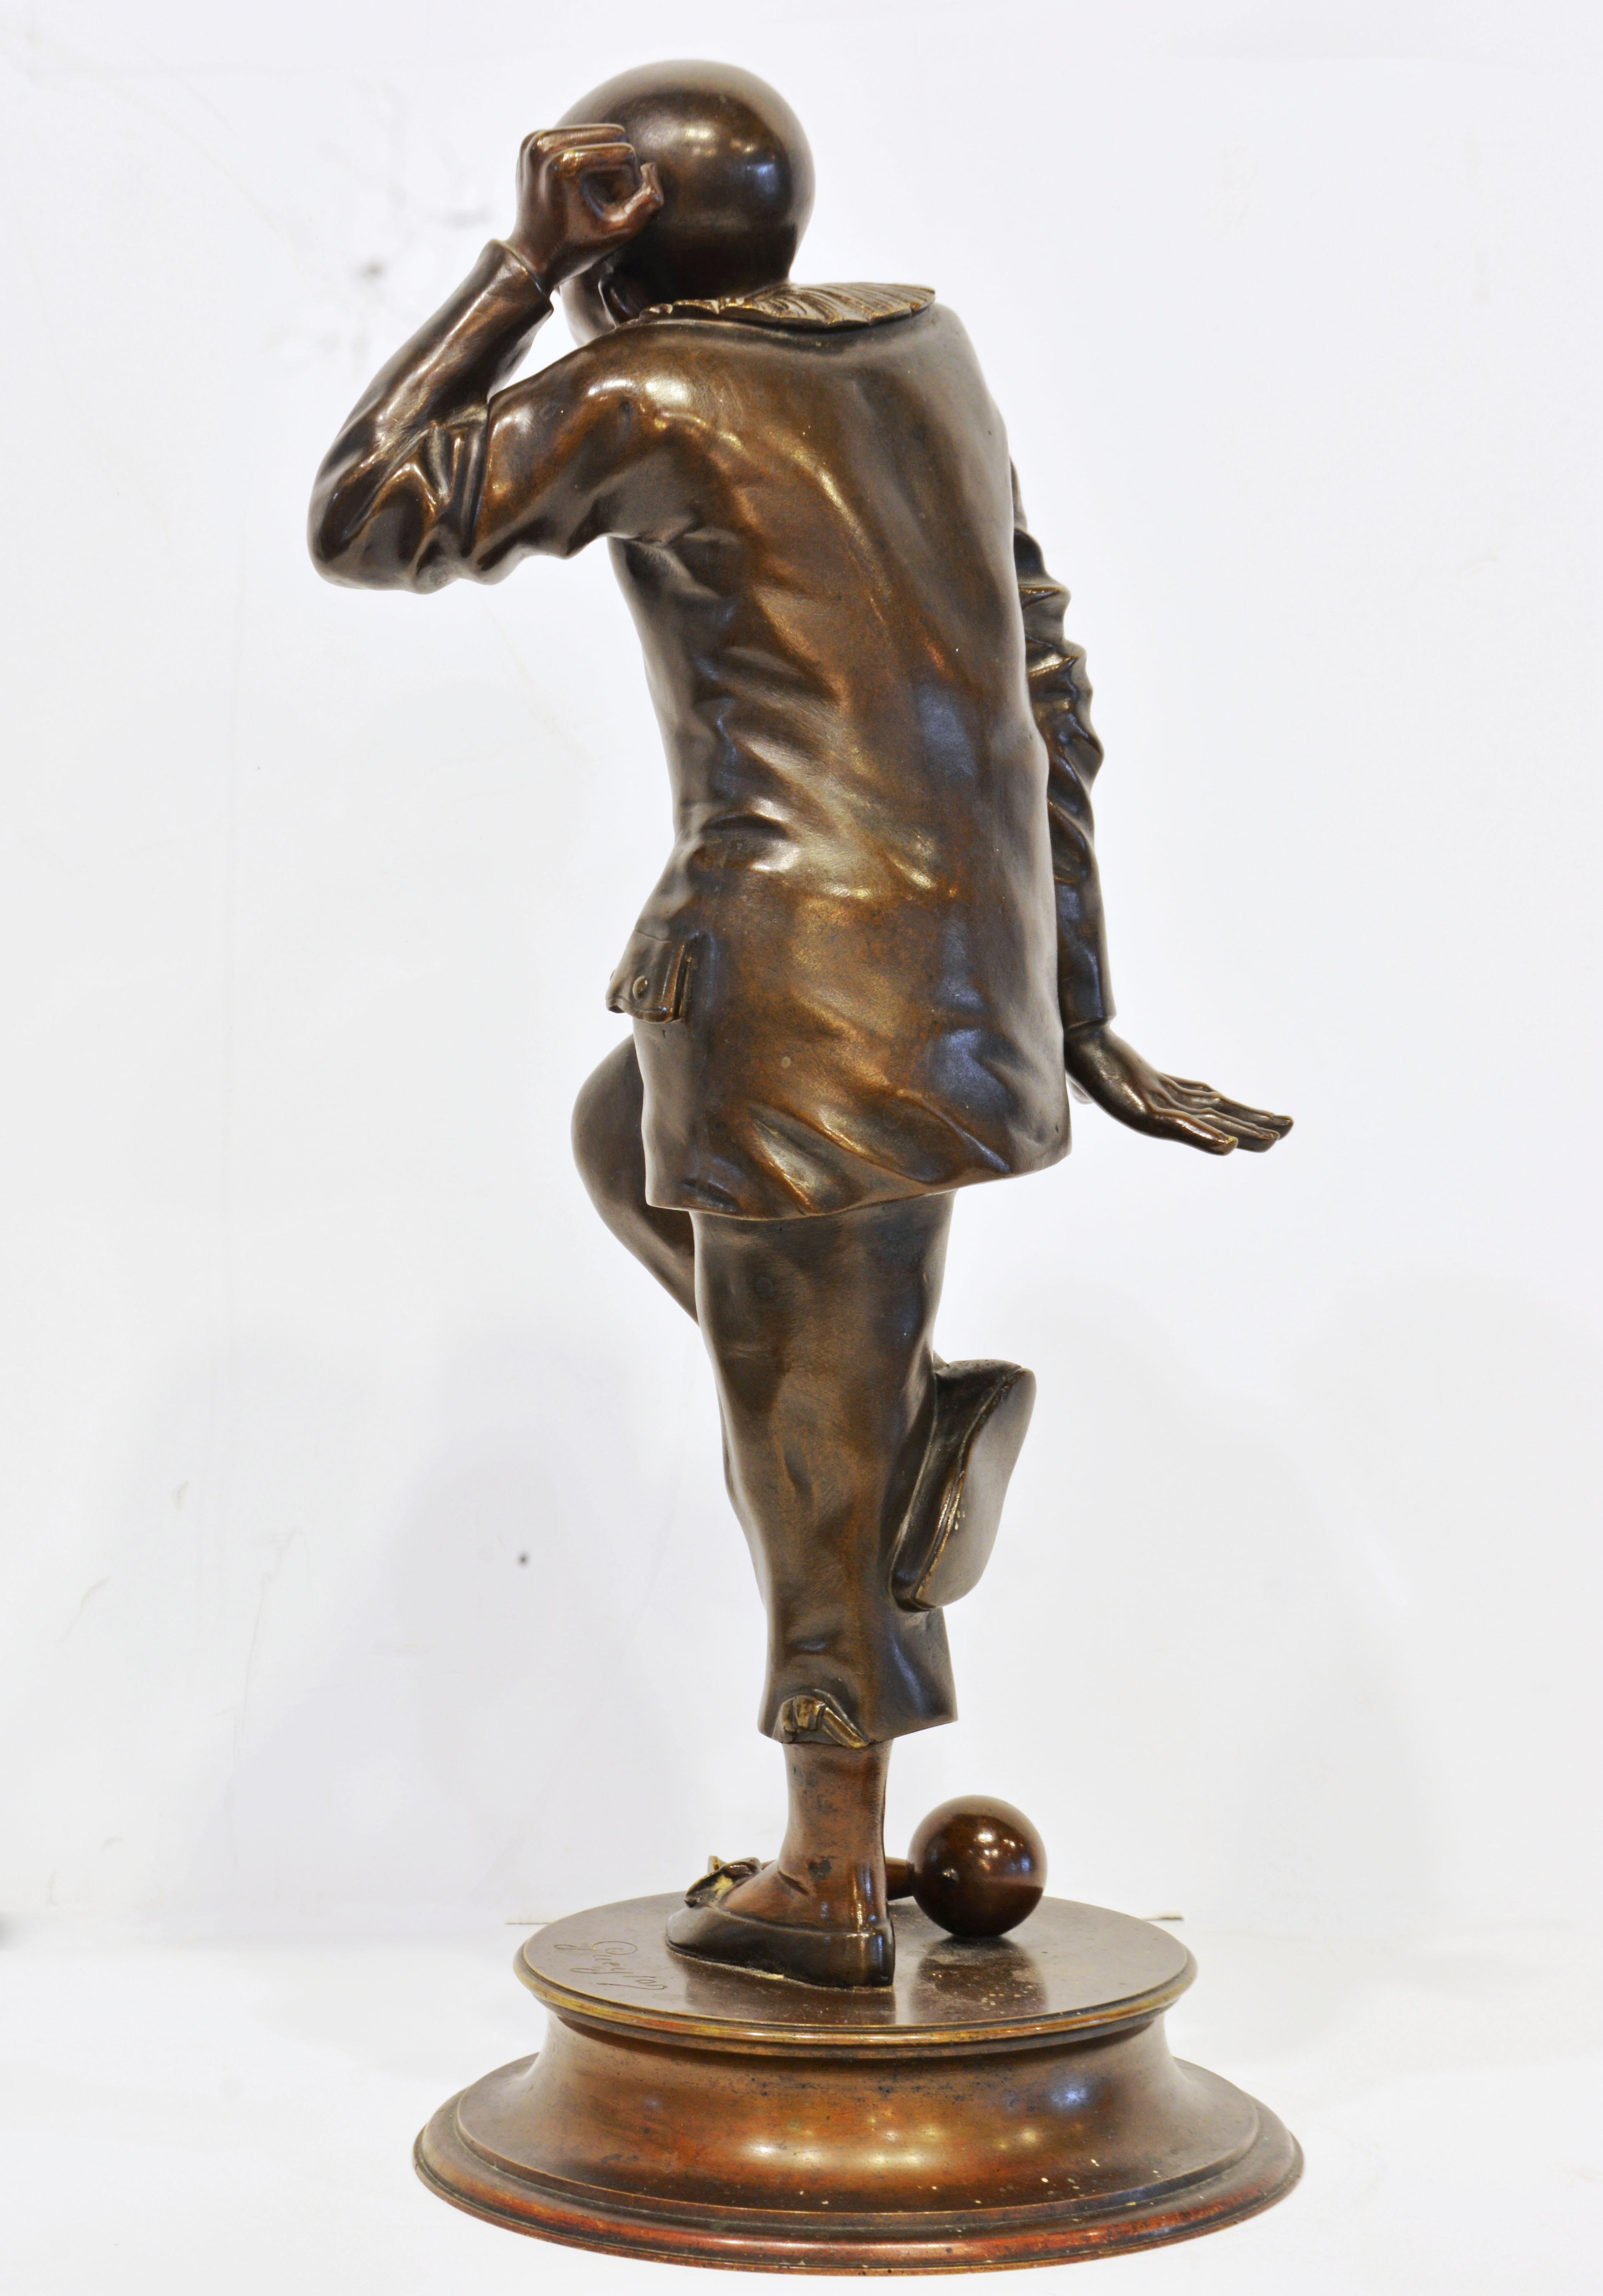 Louis Philippe Bronze Sculpture of a Posing Jester or Harlequin by French Sculptor G. Gueyton